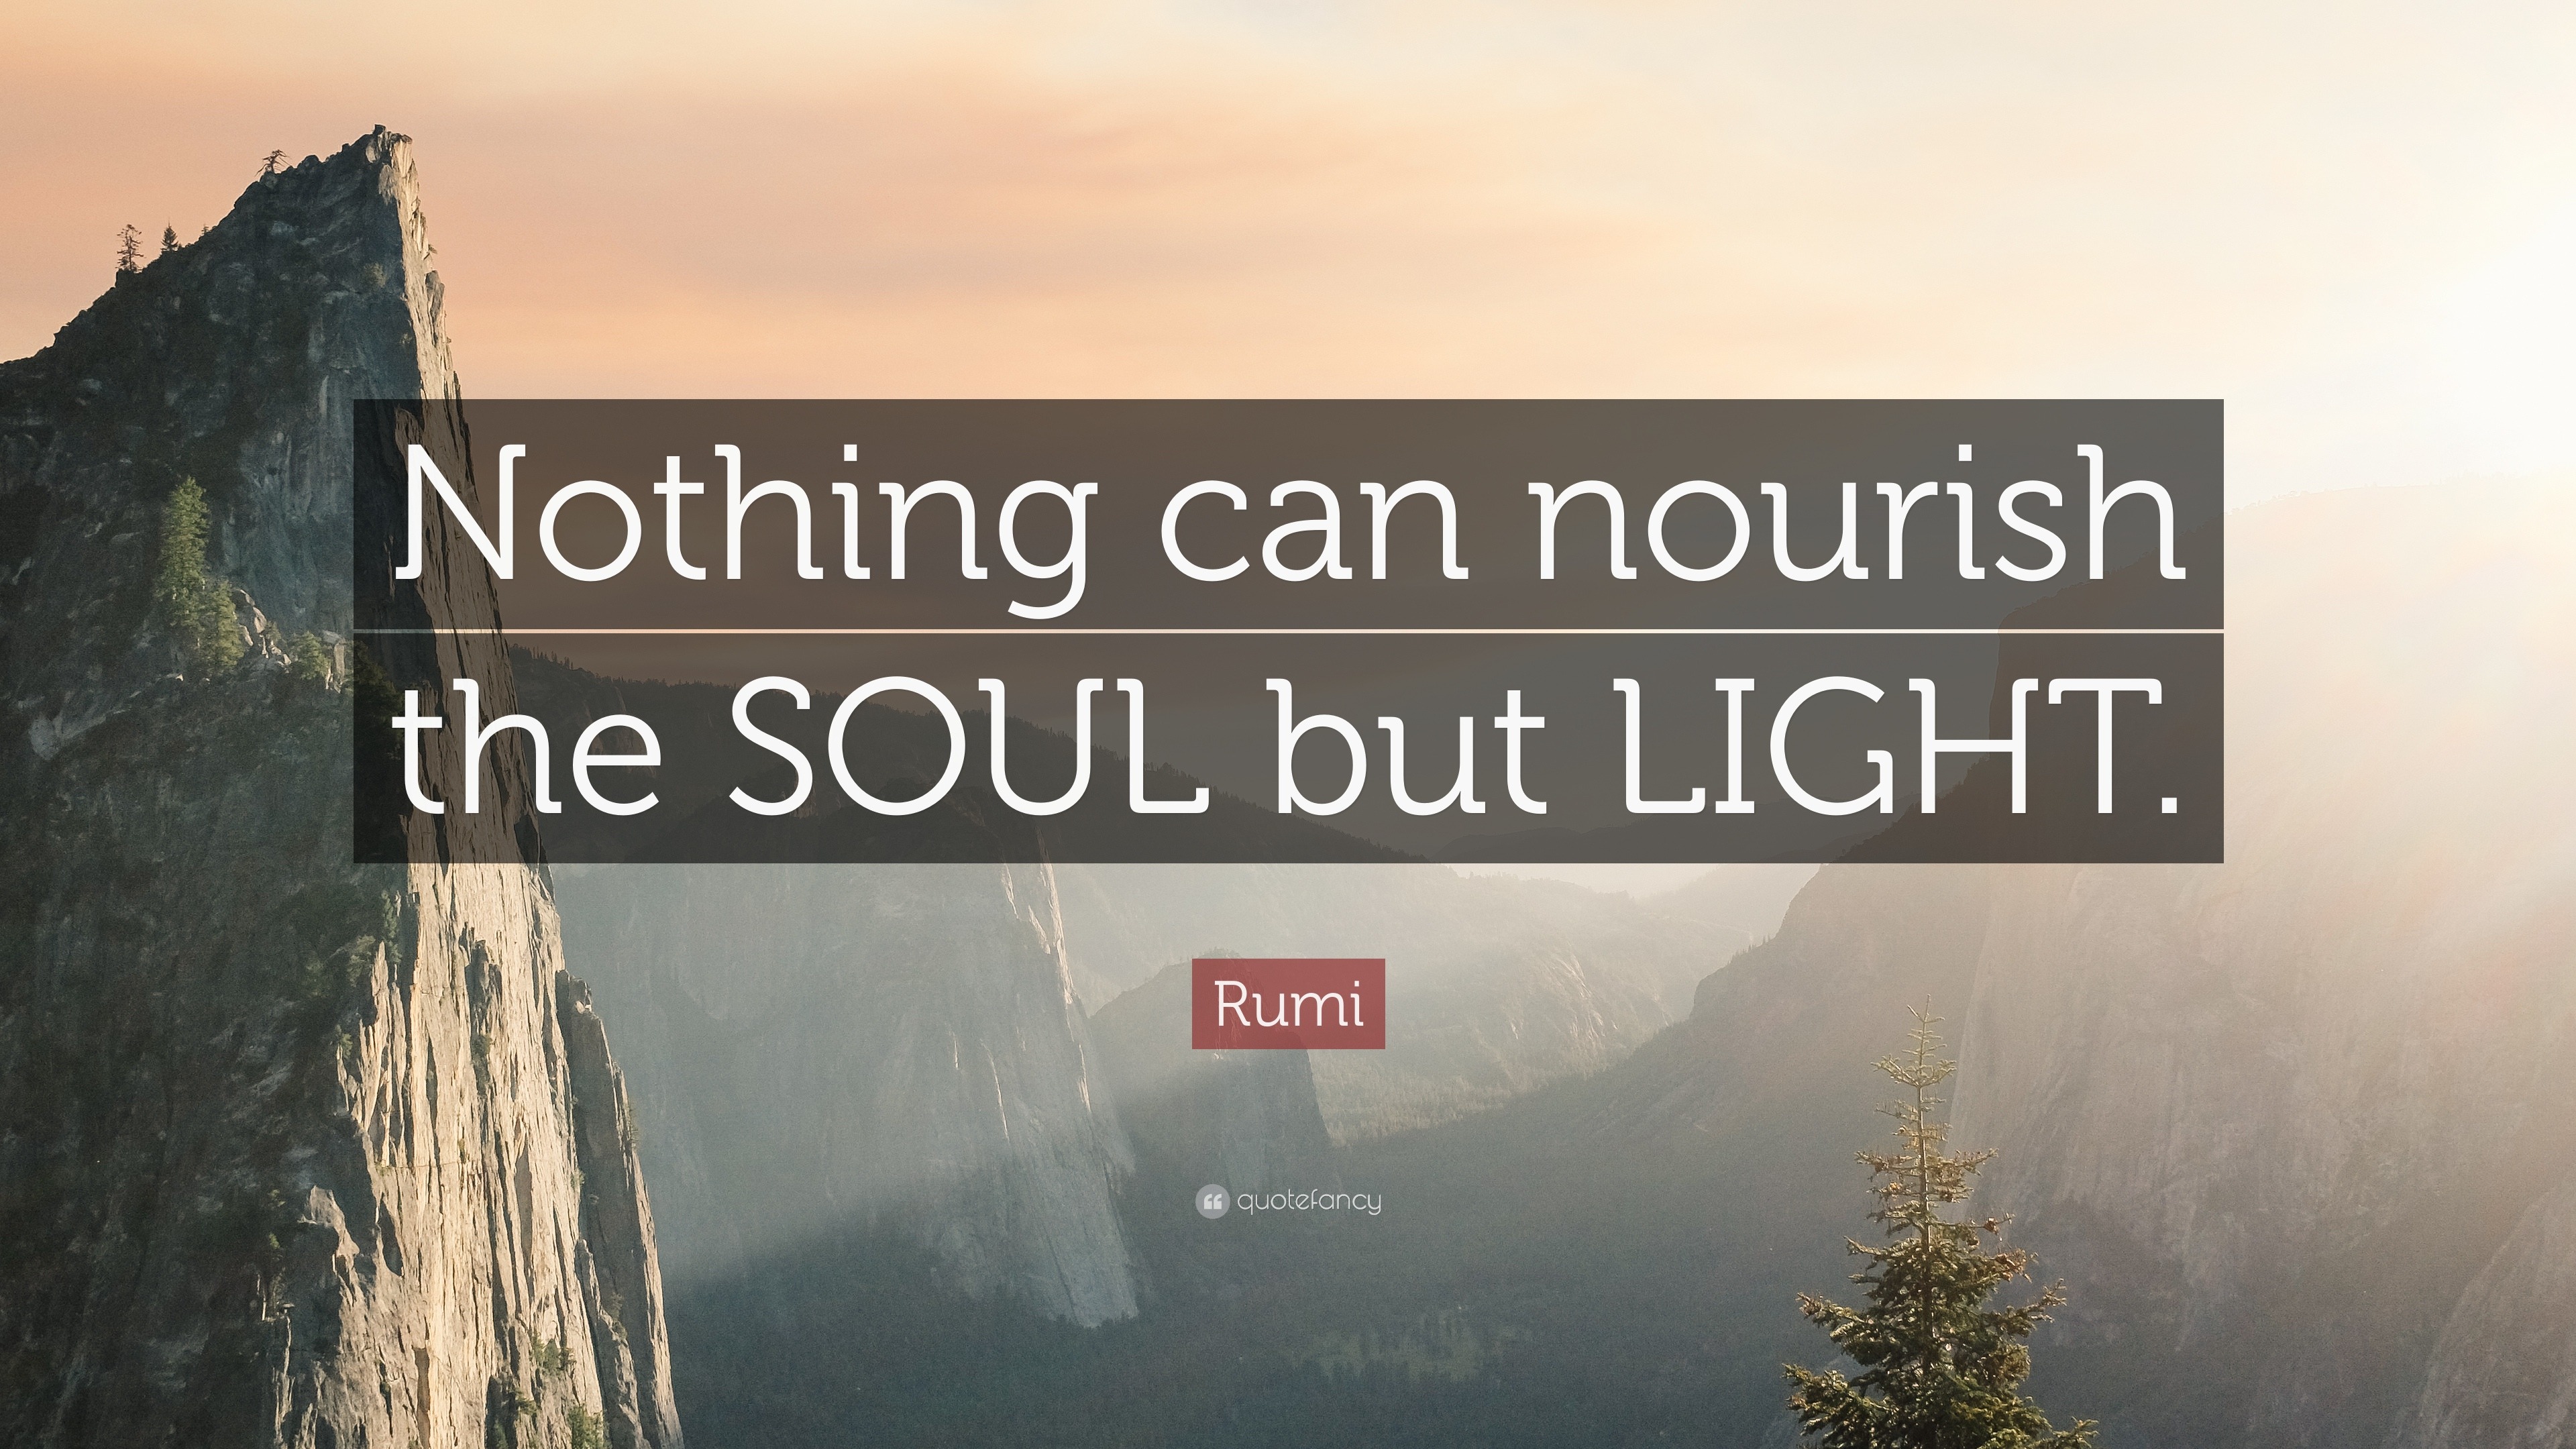 The Soul of Rumi by Rumi